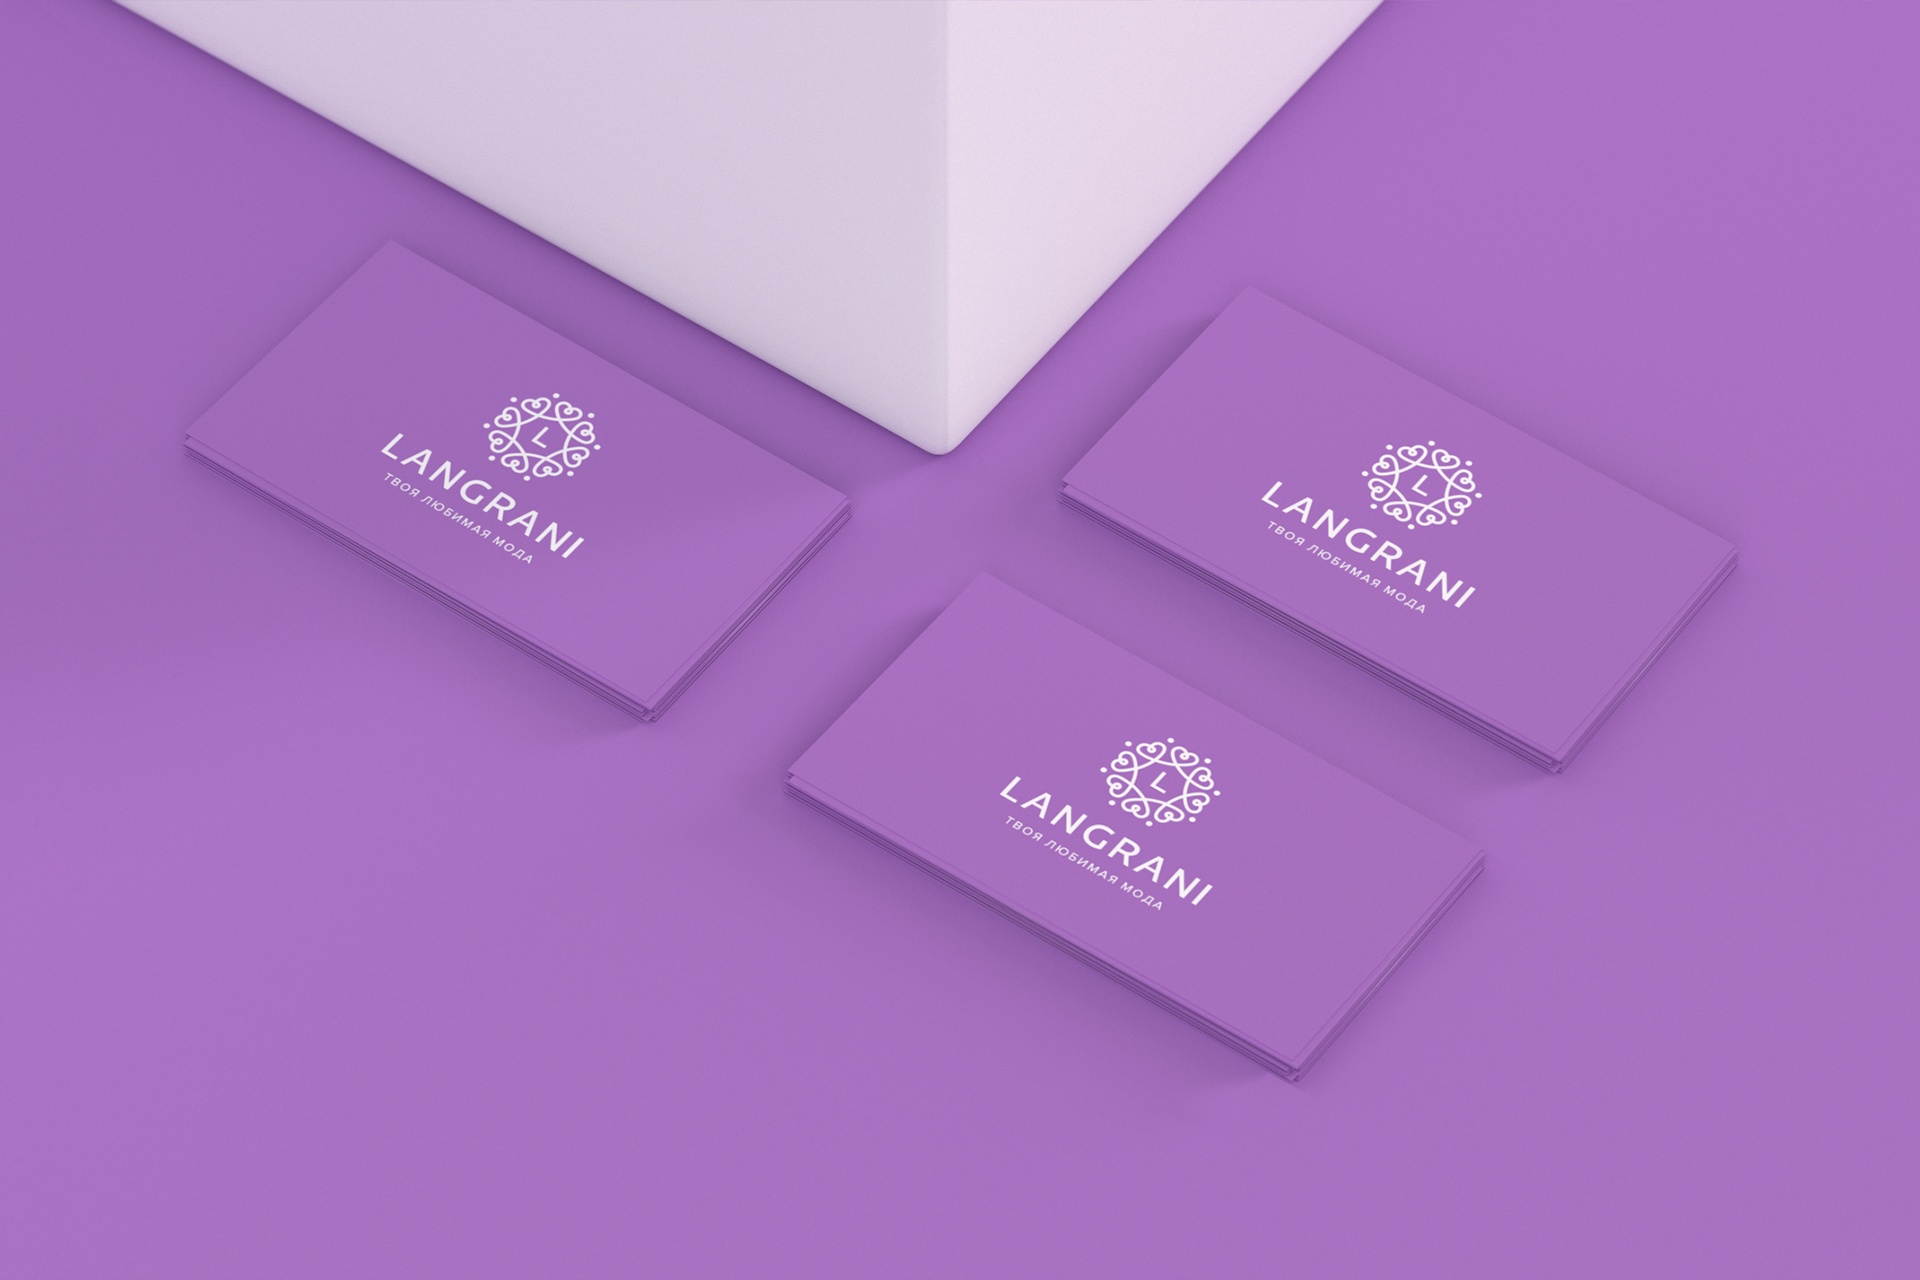 Visual identity of a women's clothing store